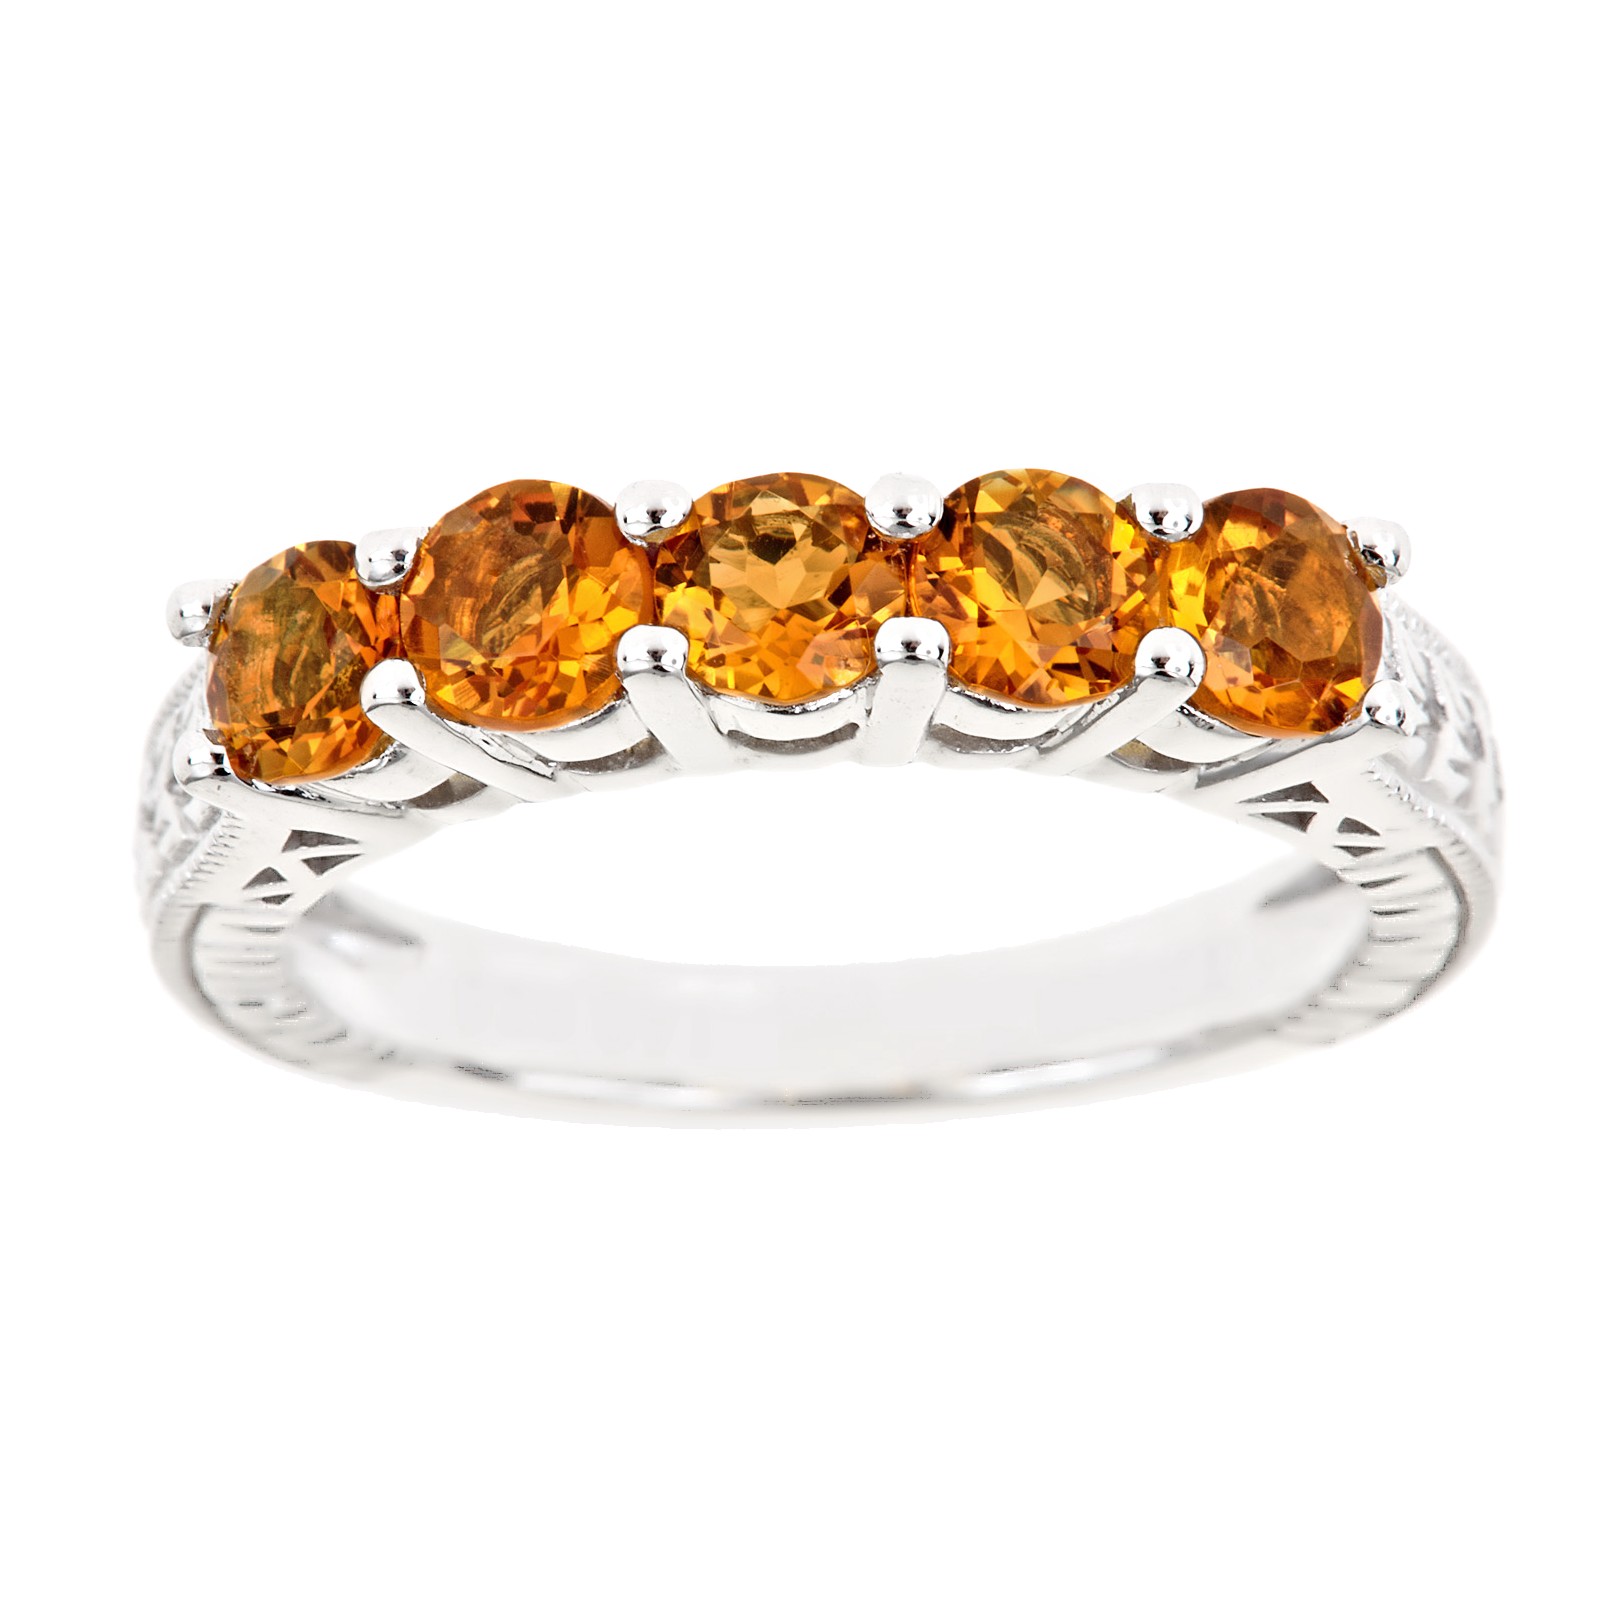 Ladies Sterling Silver 5 Stone Round Cut Citrine Ring